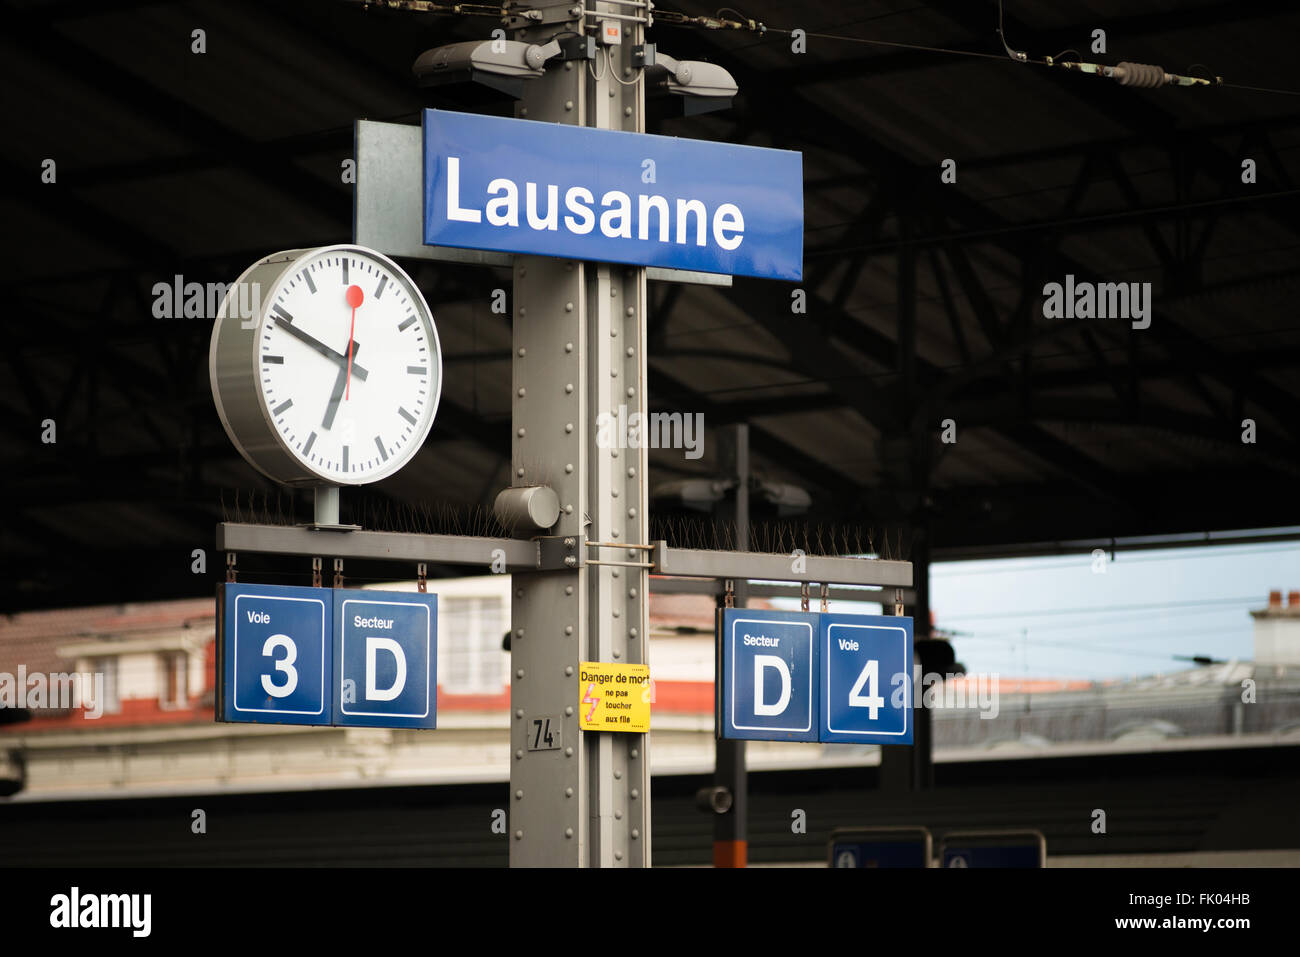 Lausanne station sign at Lausanne train station in Switzerland Stock Photo